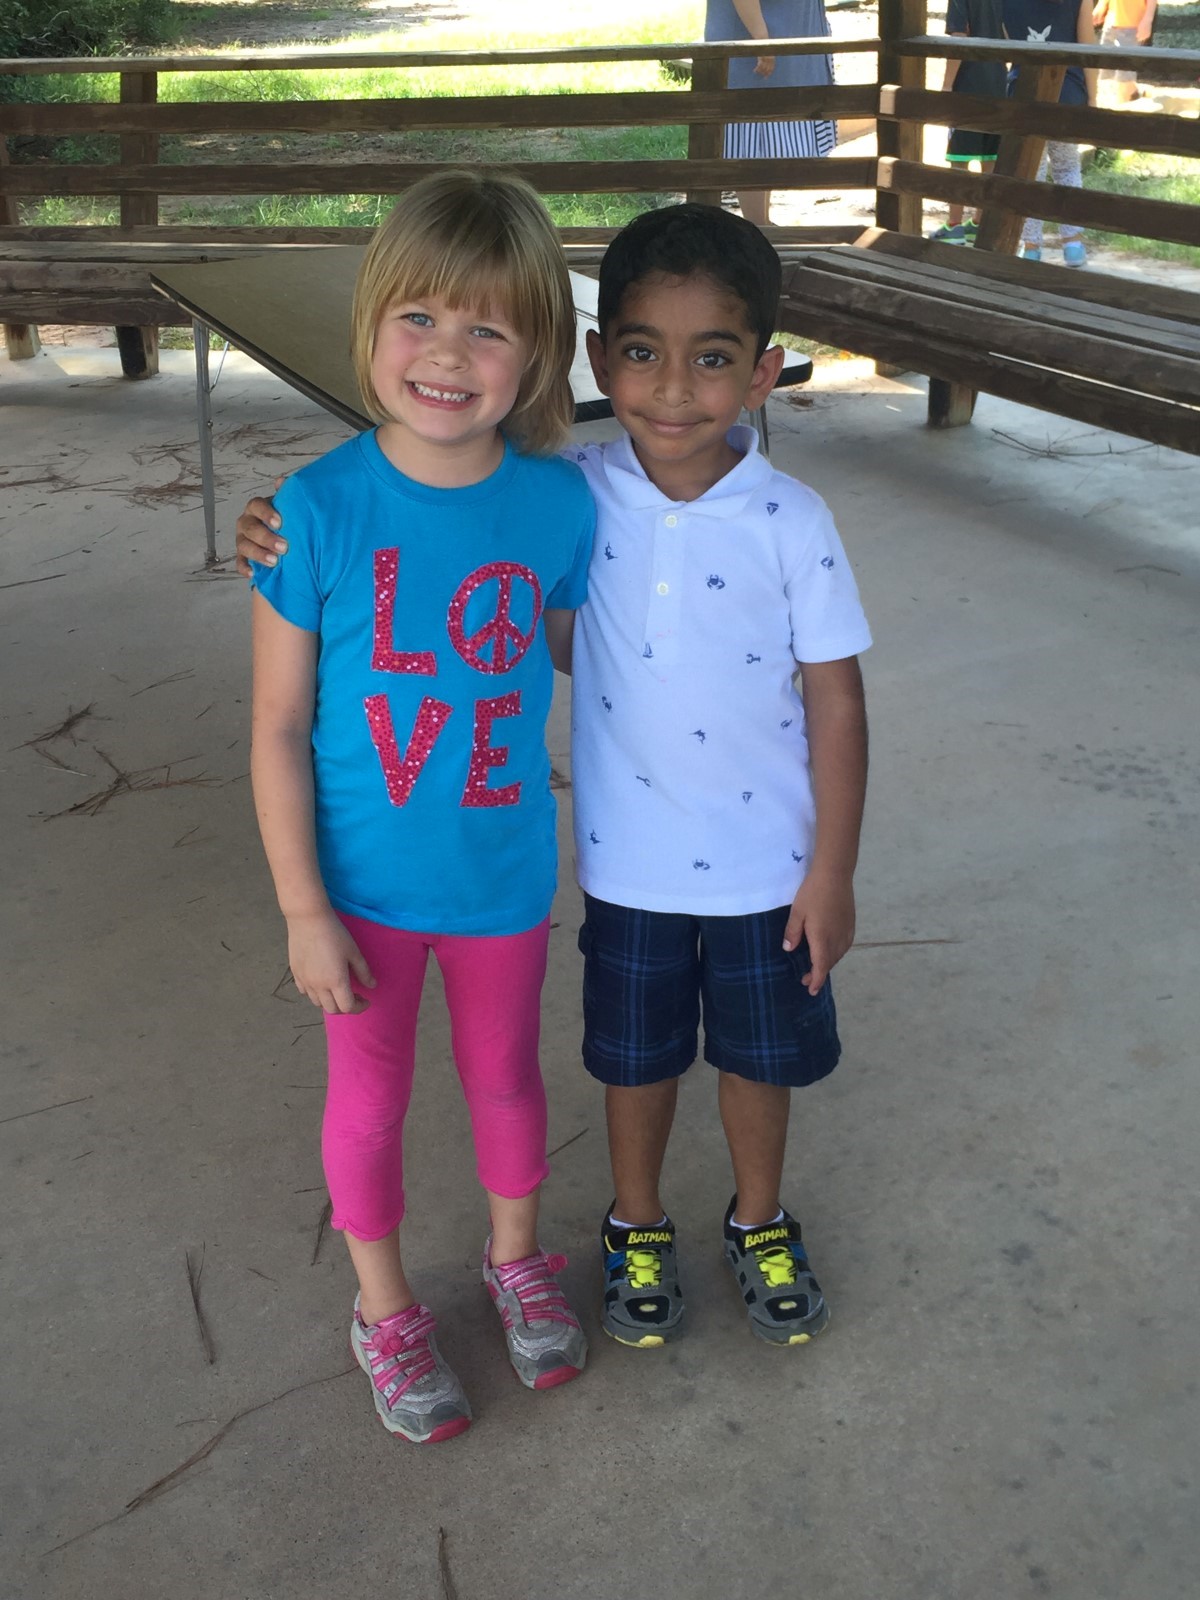 Galatas first graders enjoy time outside during recess.